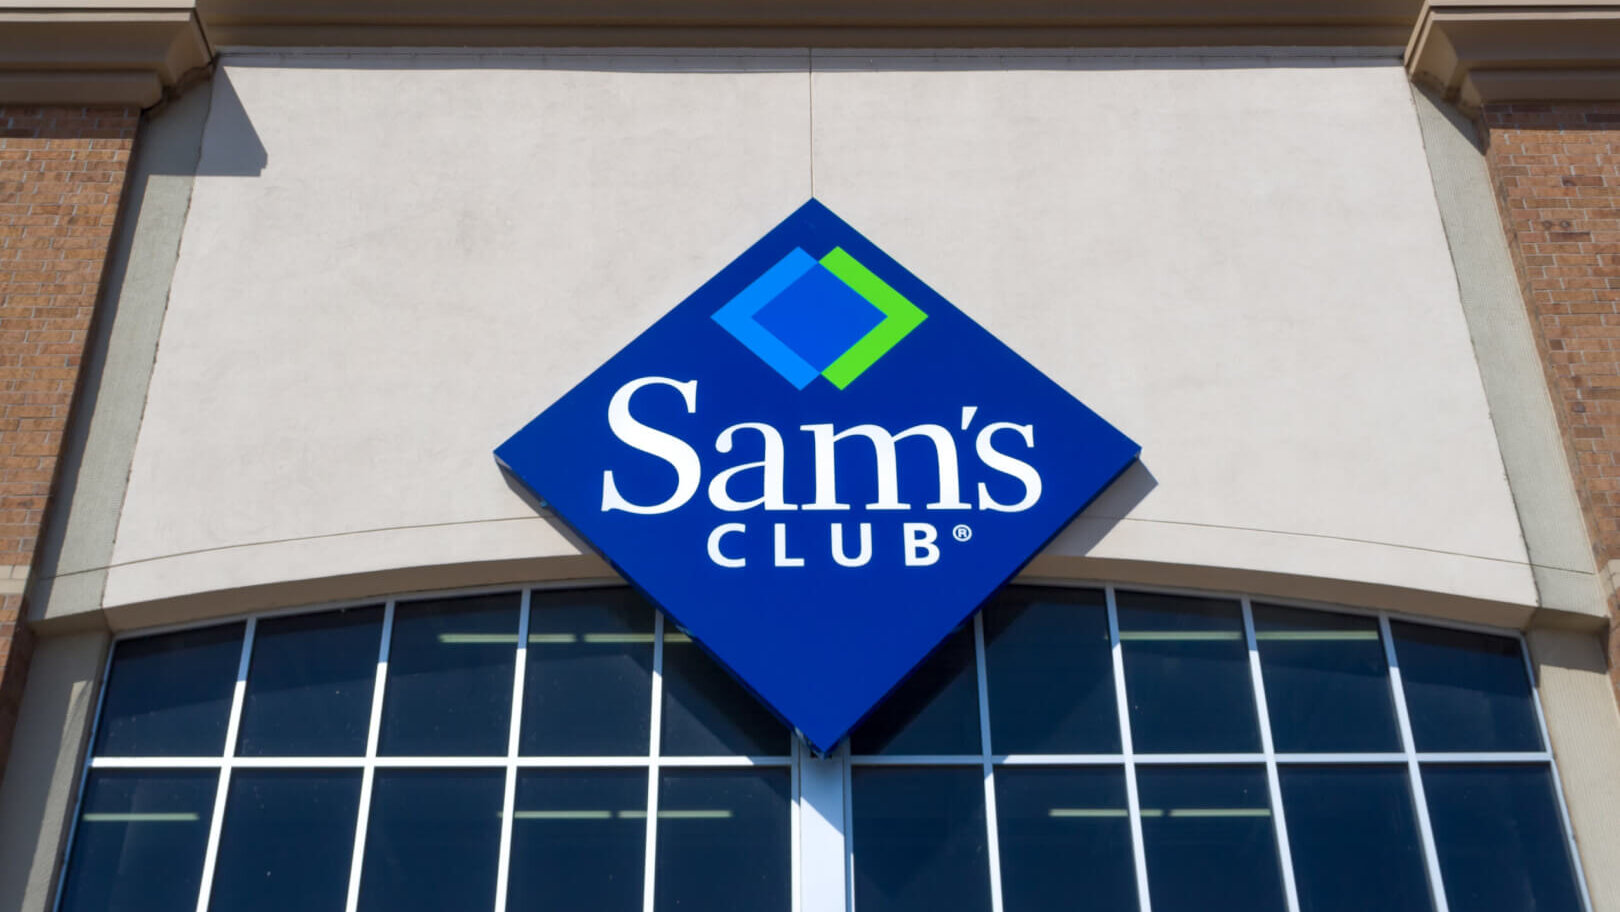 You can get a 1-year Sam’s Club membership for $14 right now